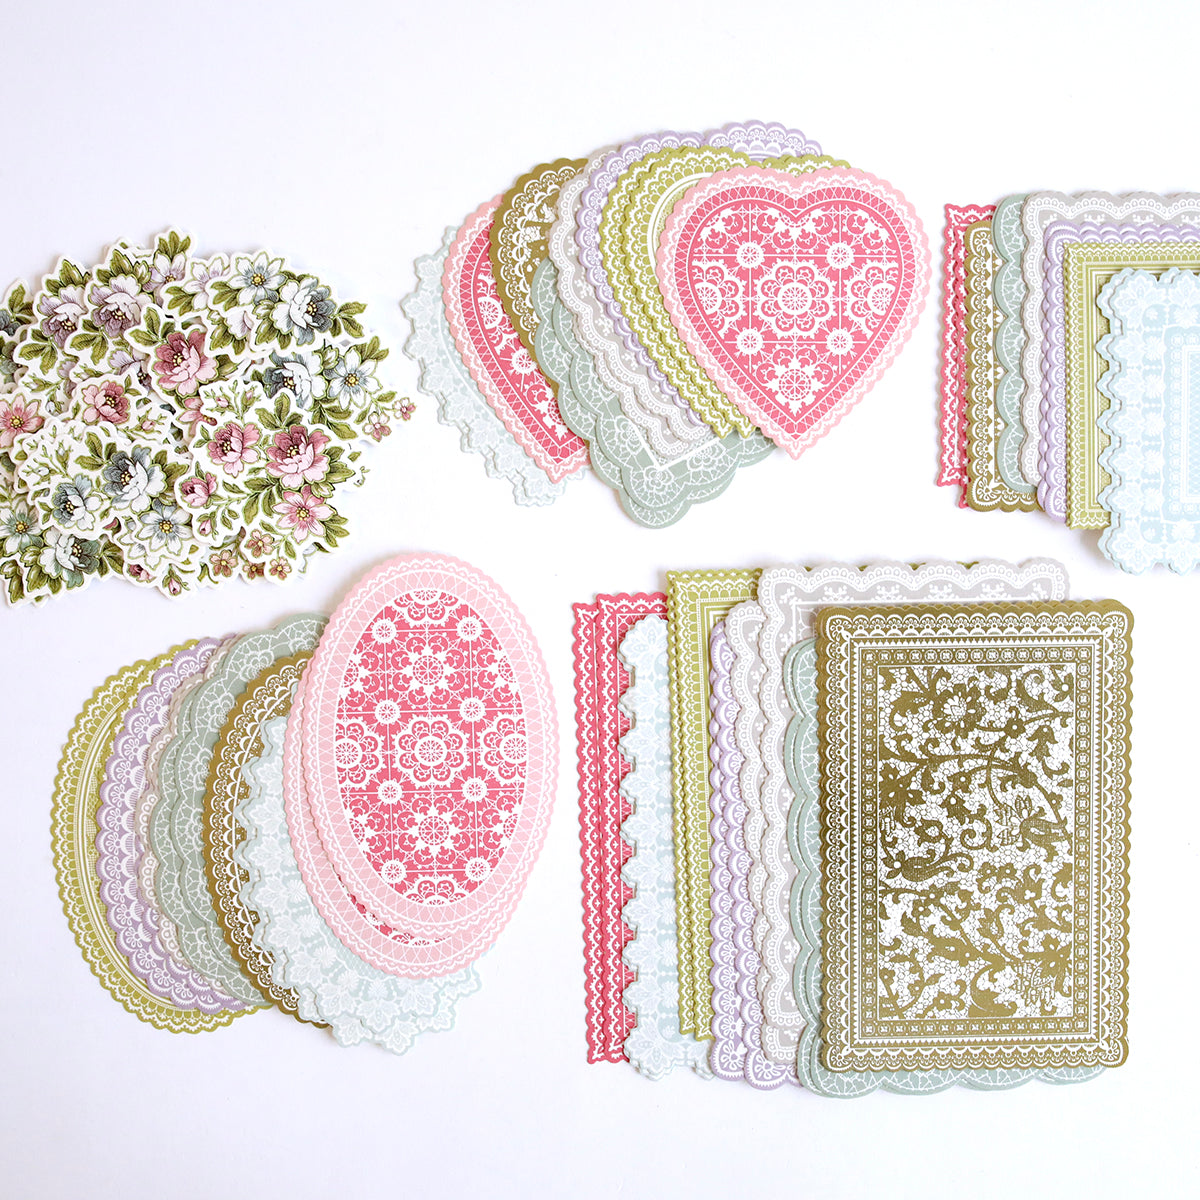 A collection of Lace Doily Embellishments and paper flowers on a white surface, perfect for creating Valentine's cards.